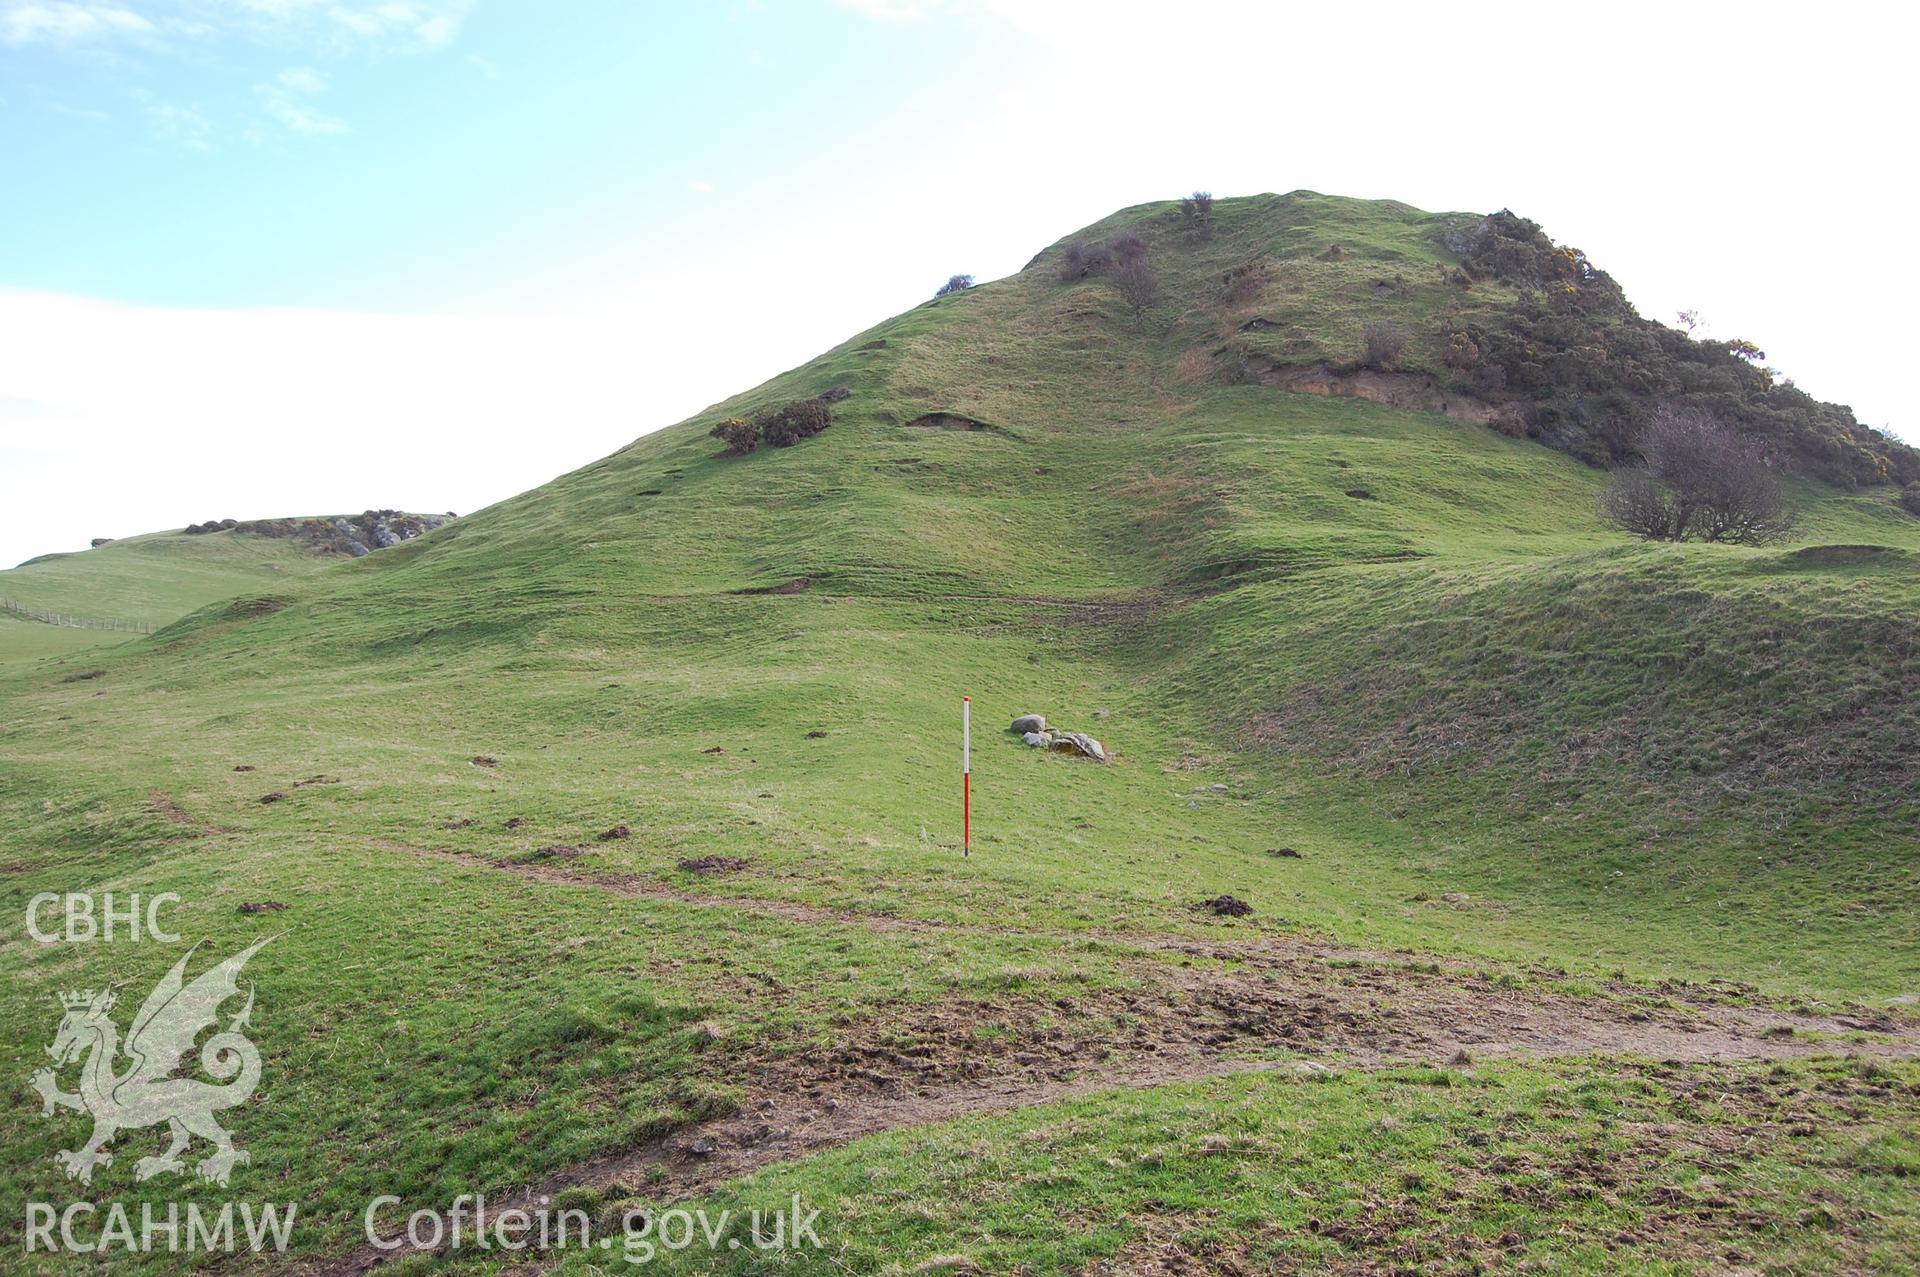 Digital photograph from an archaeological assessment of Deganwy Castle, carried out by Gwynedd Archaeological Trust, 2009. View up main North ditch with incline next to it.